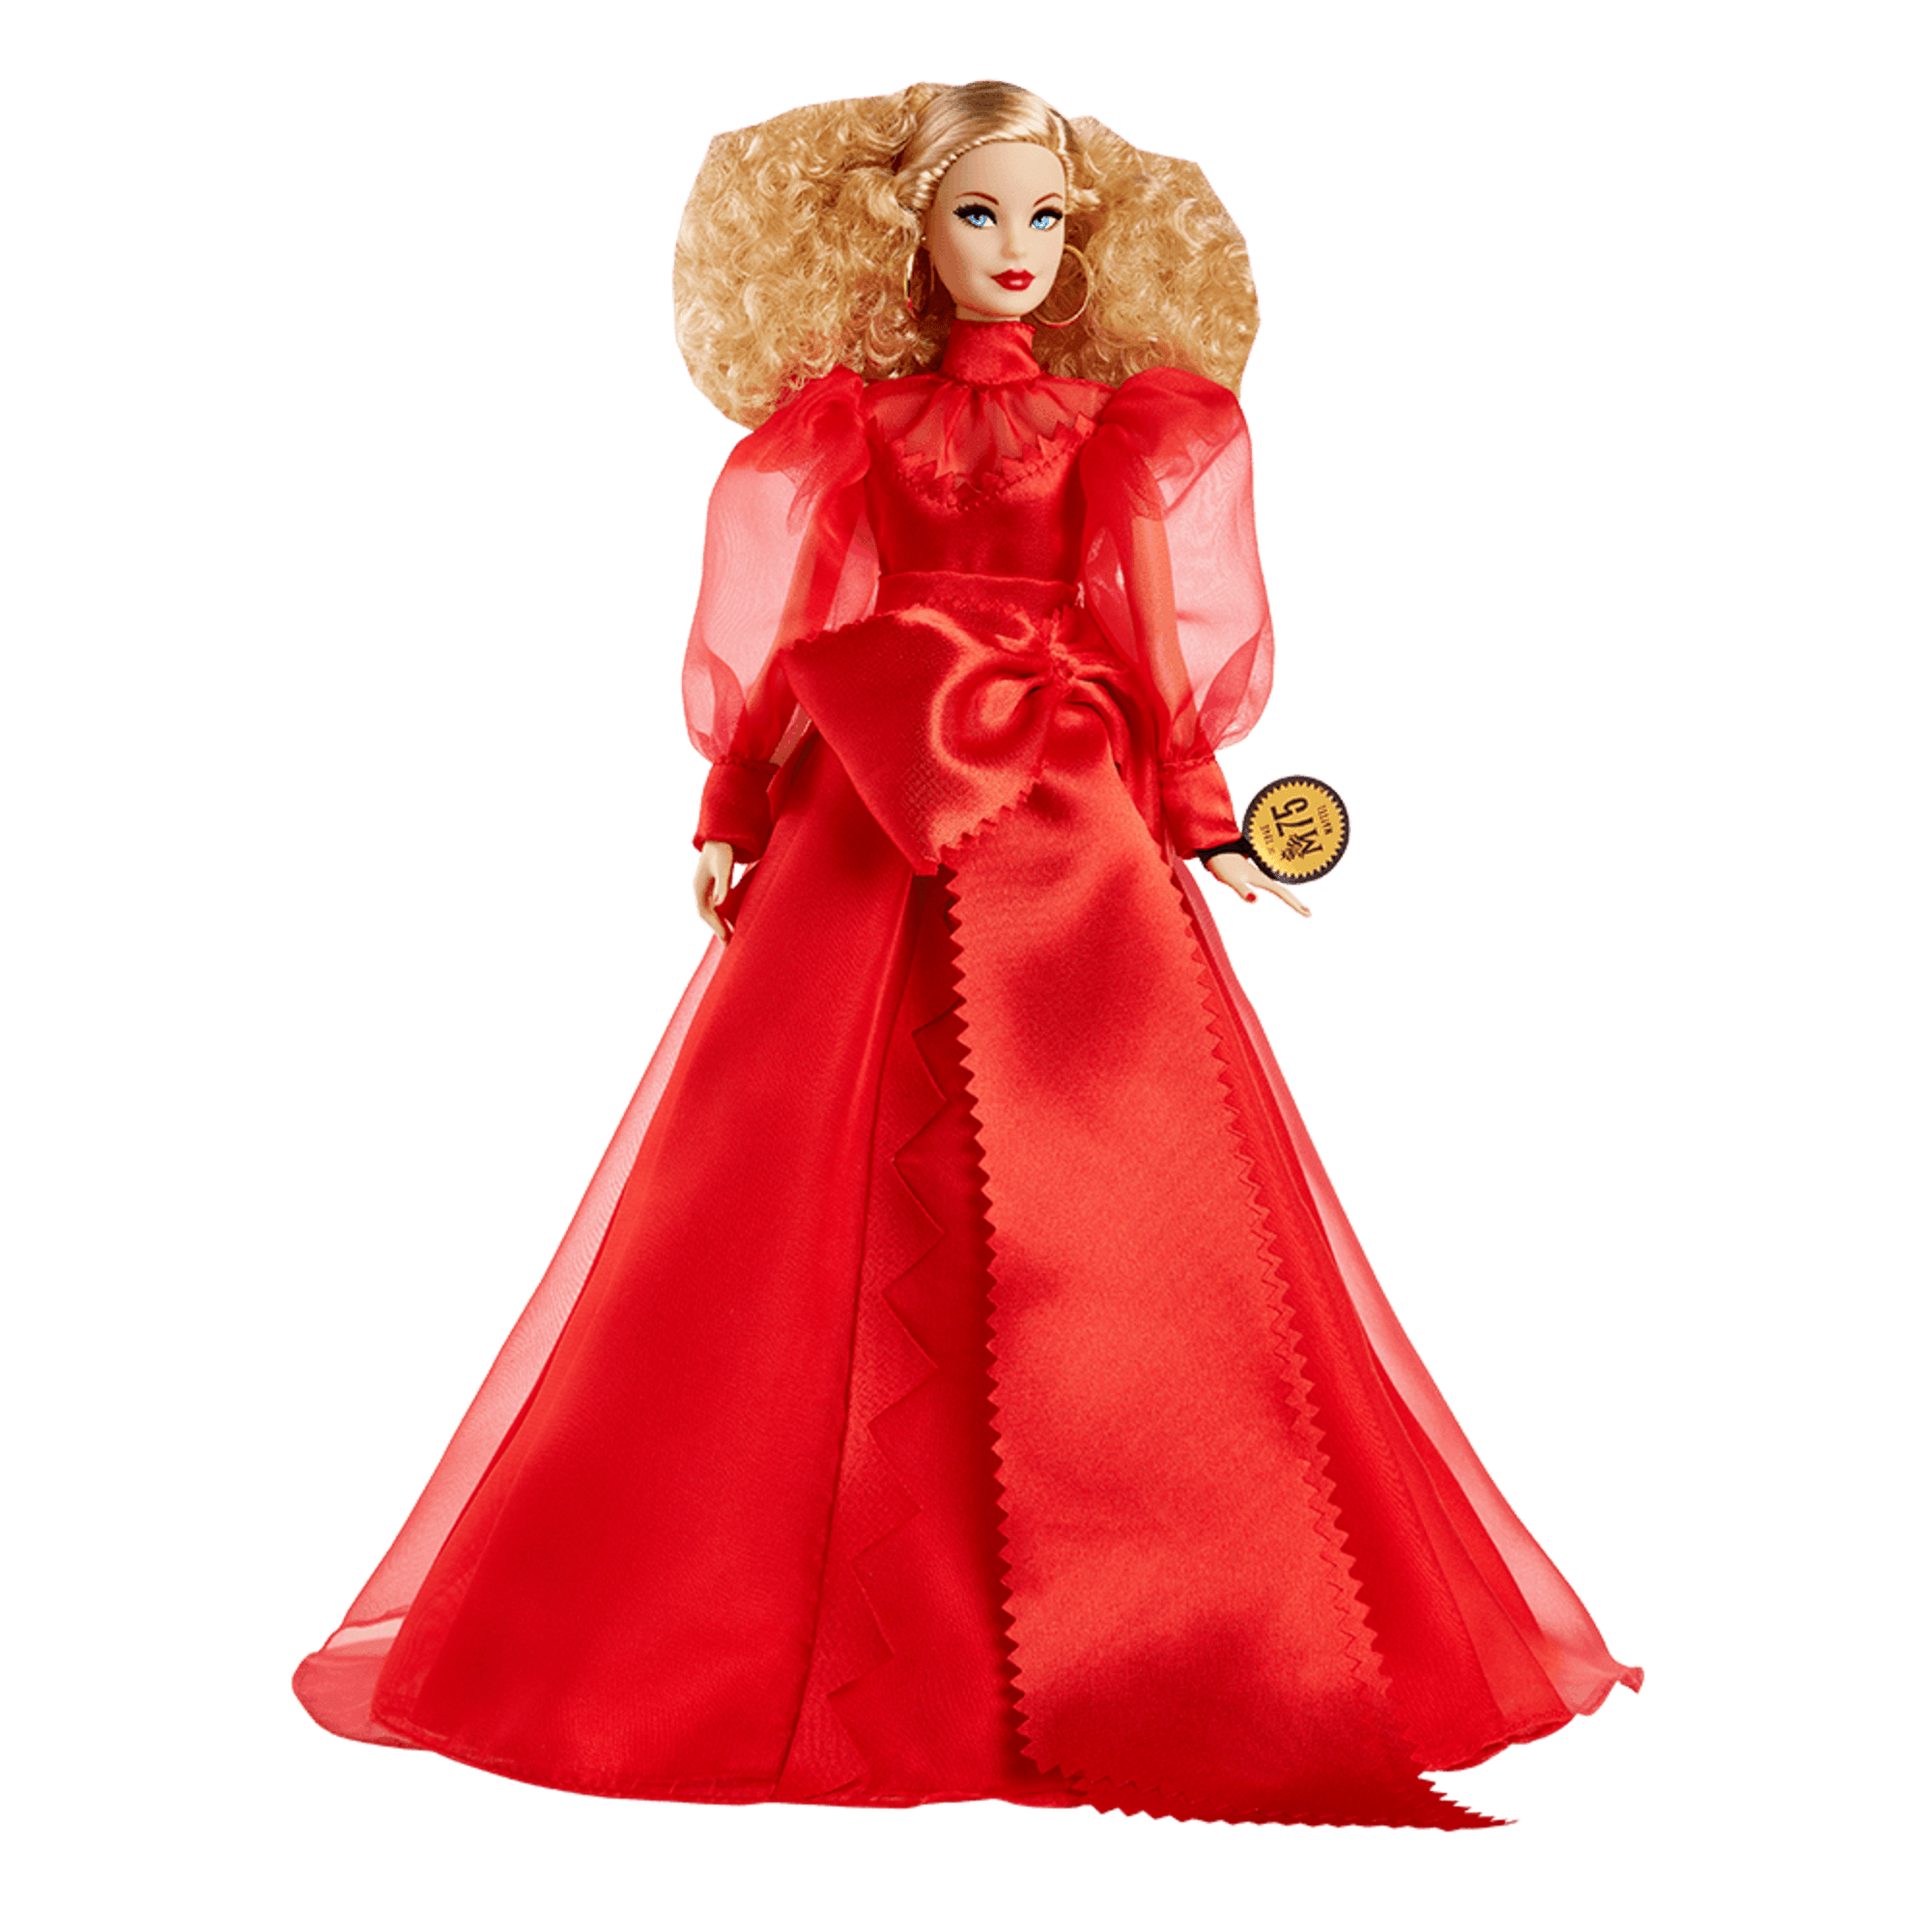 Barbie Collector Mattel 75th Anniversary Doll (12-in Blonde) in